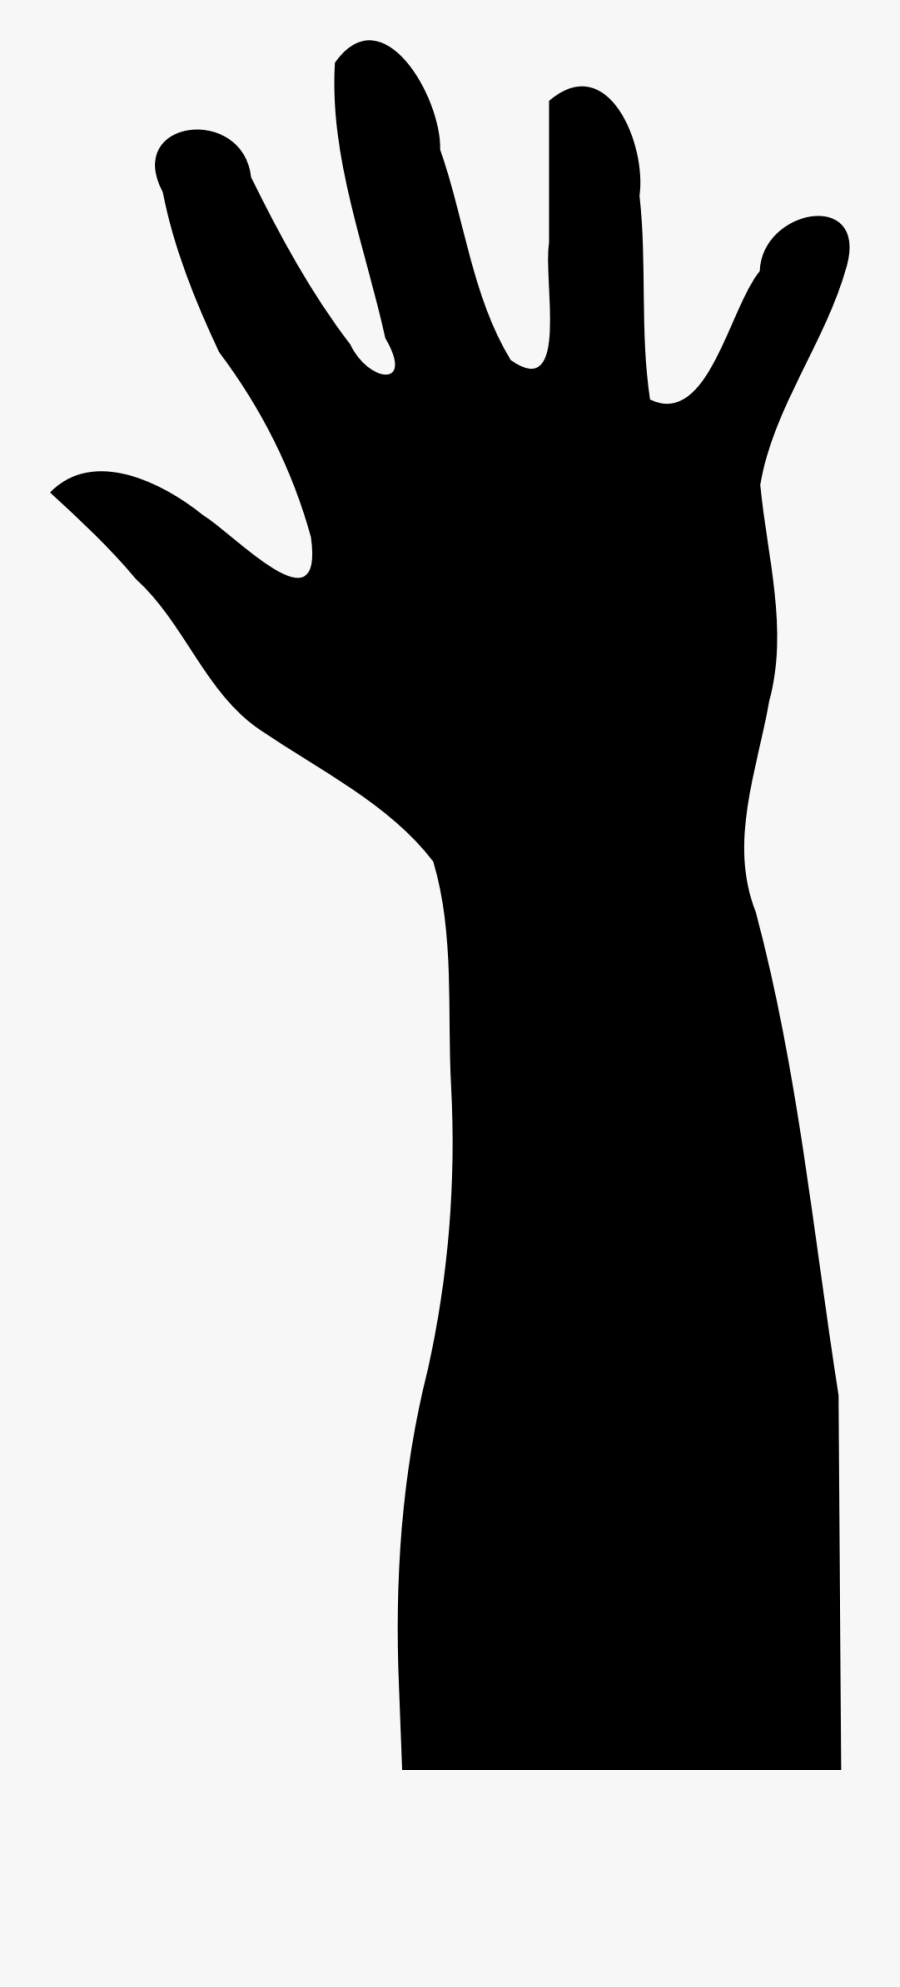 Picture Transparent Download Raised Hand Clipart - Reaching Hand Silhouette Png, Transparent Clipart